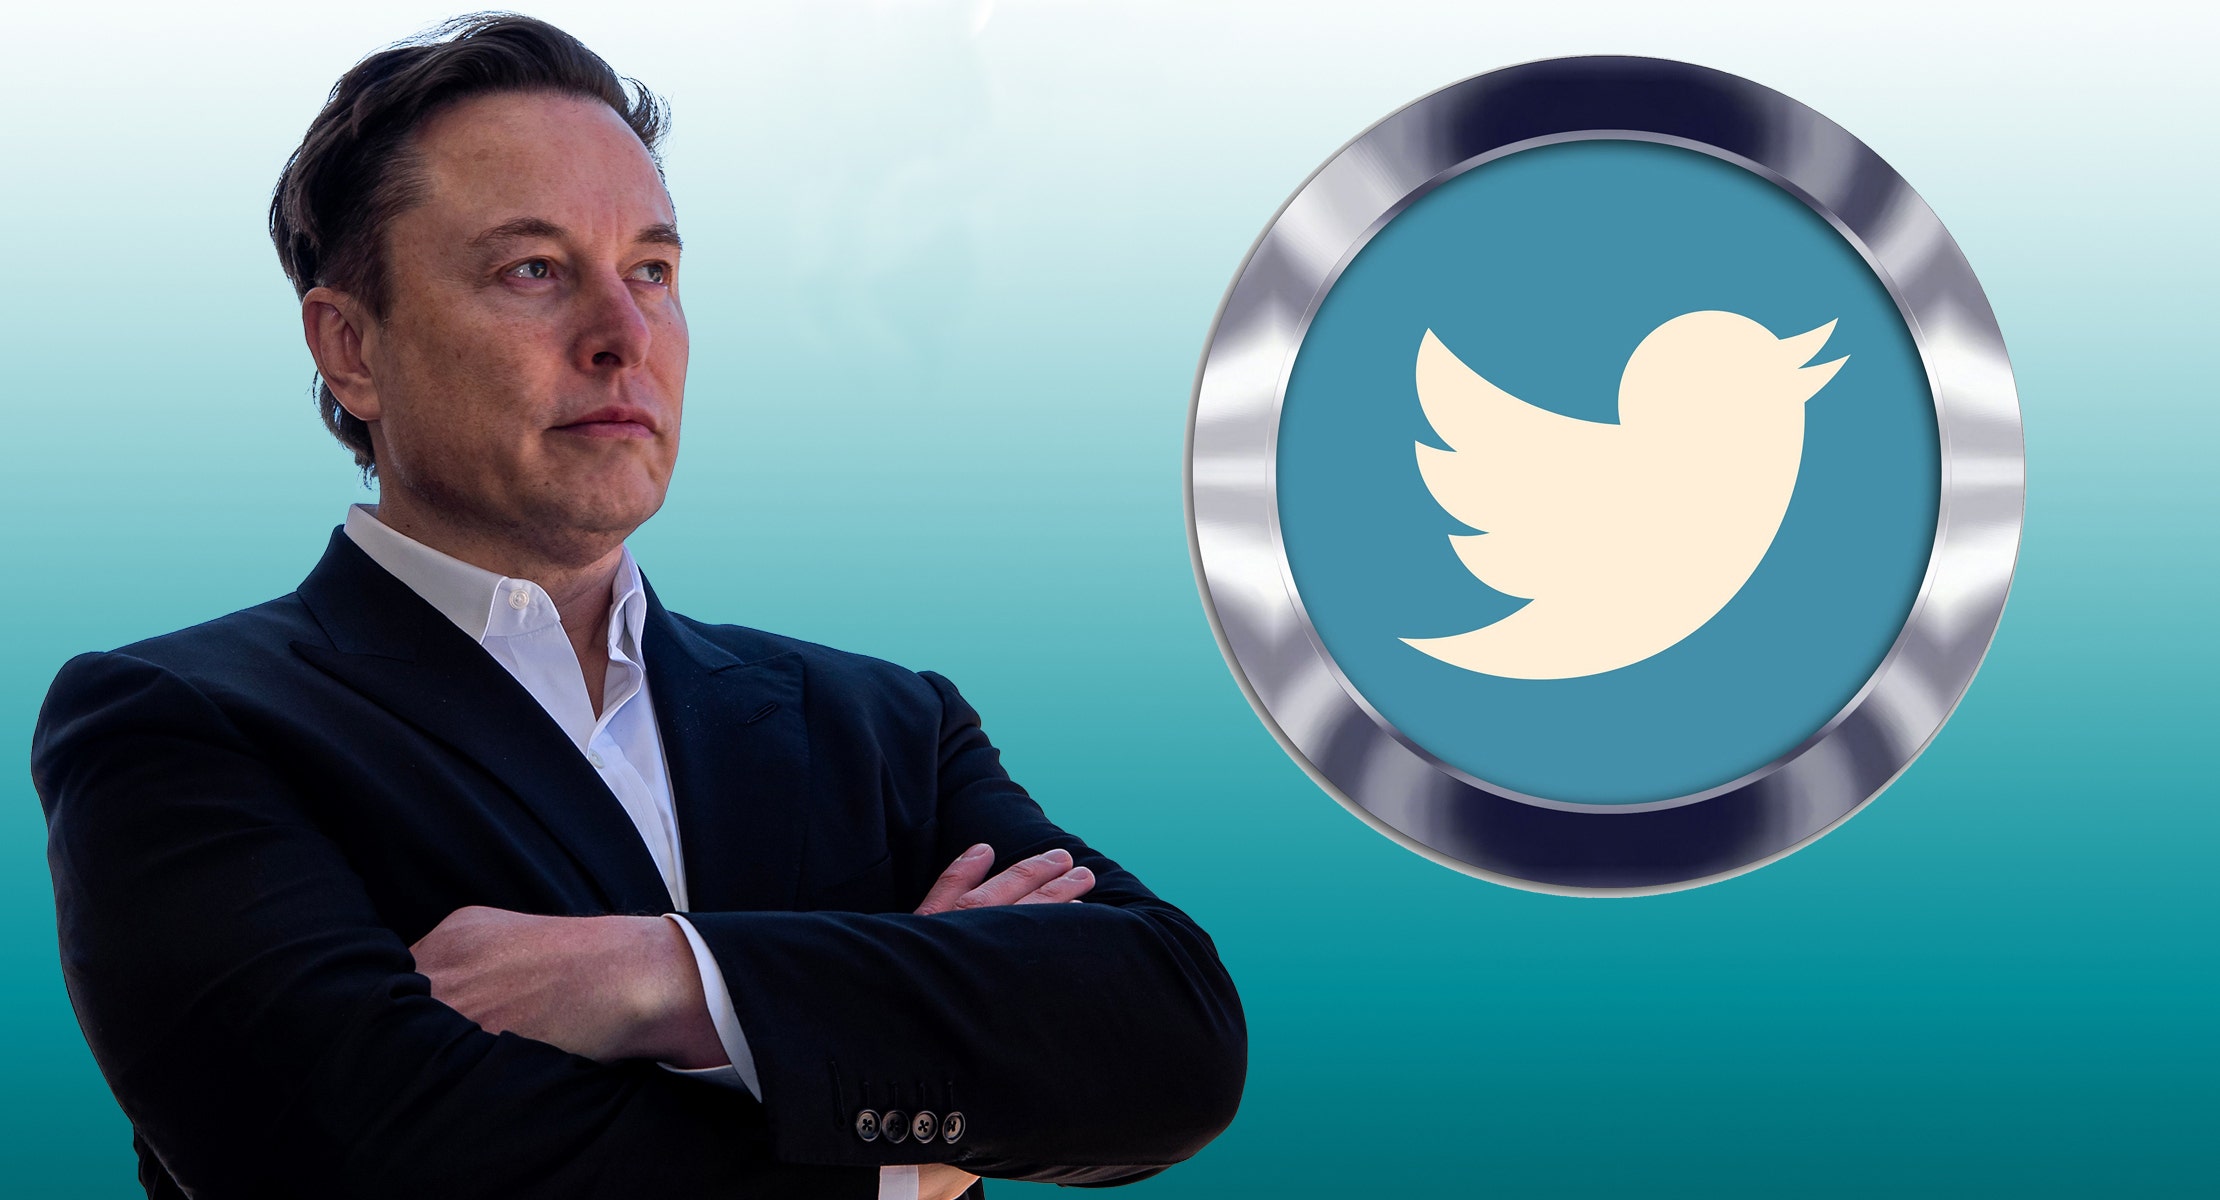 Twitter Employees Have Demands For Elon Musk, Don't Want To Be 'Pawns In A Game Played By Billionaires'